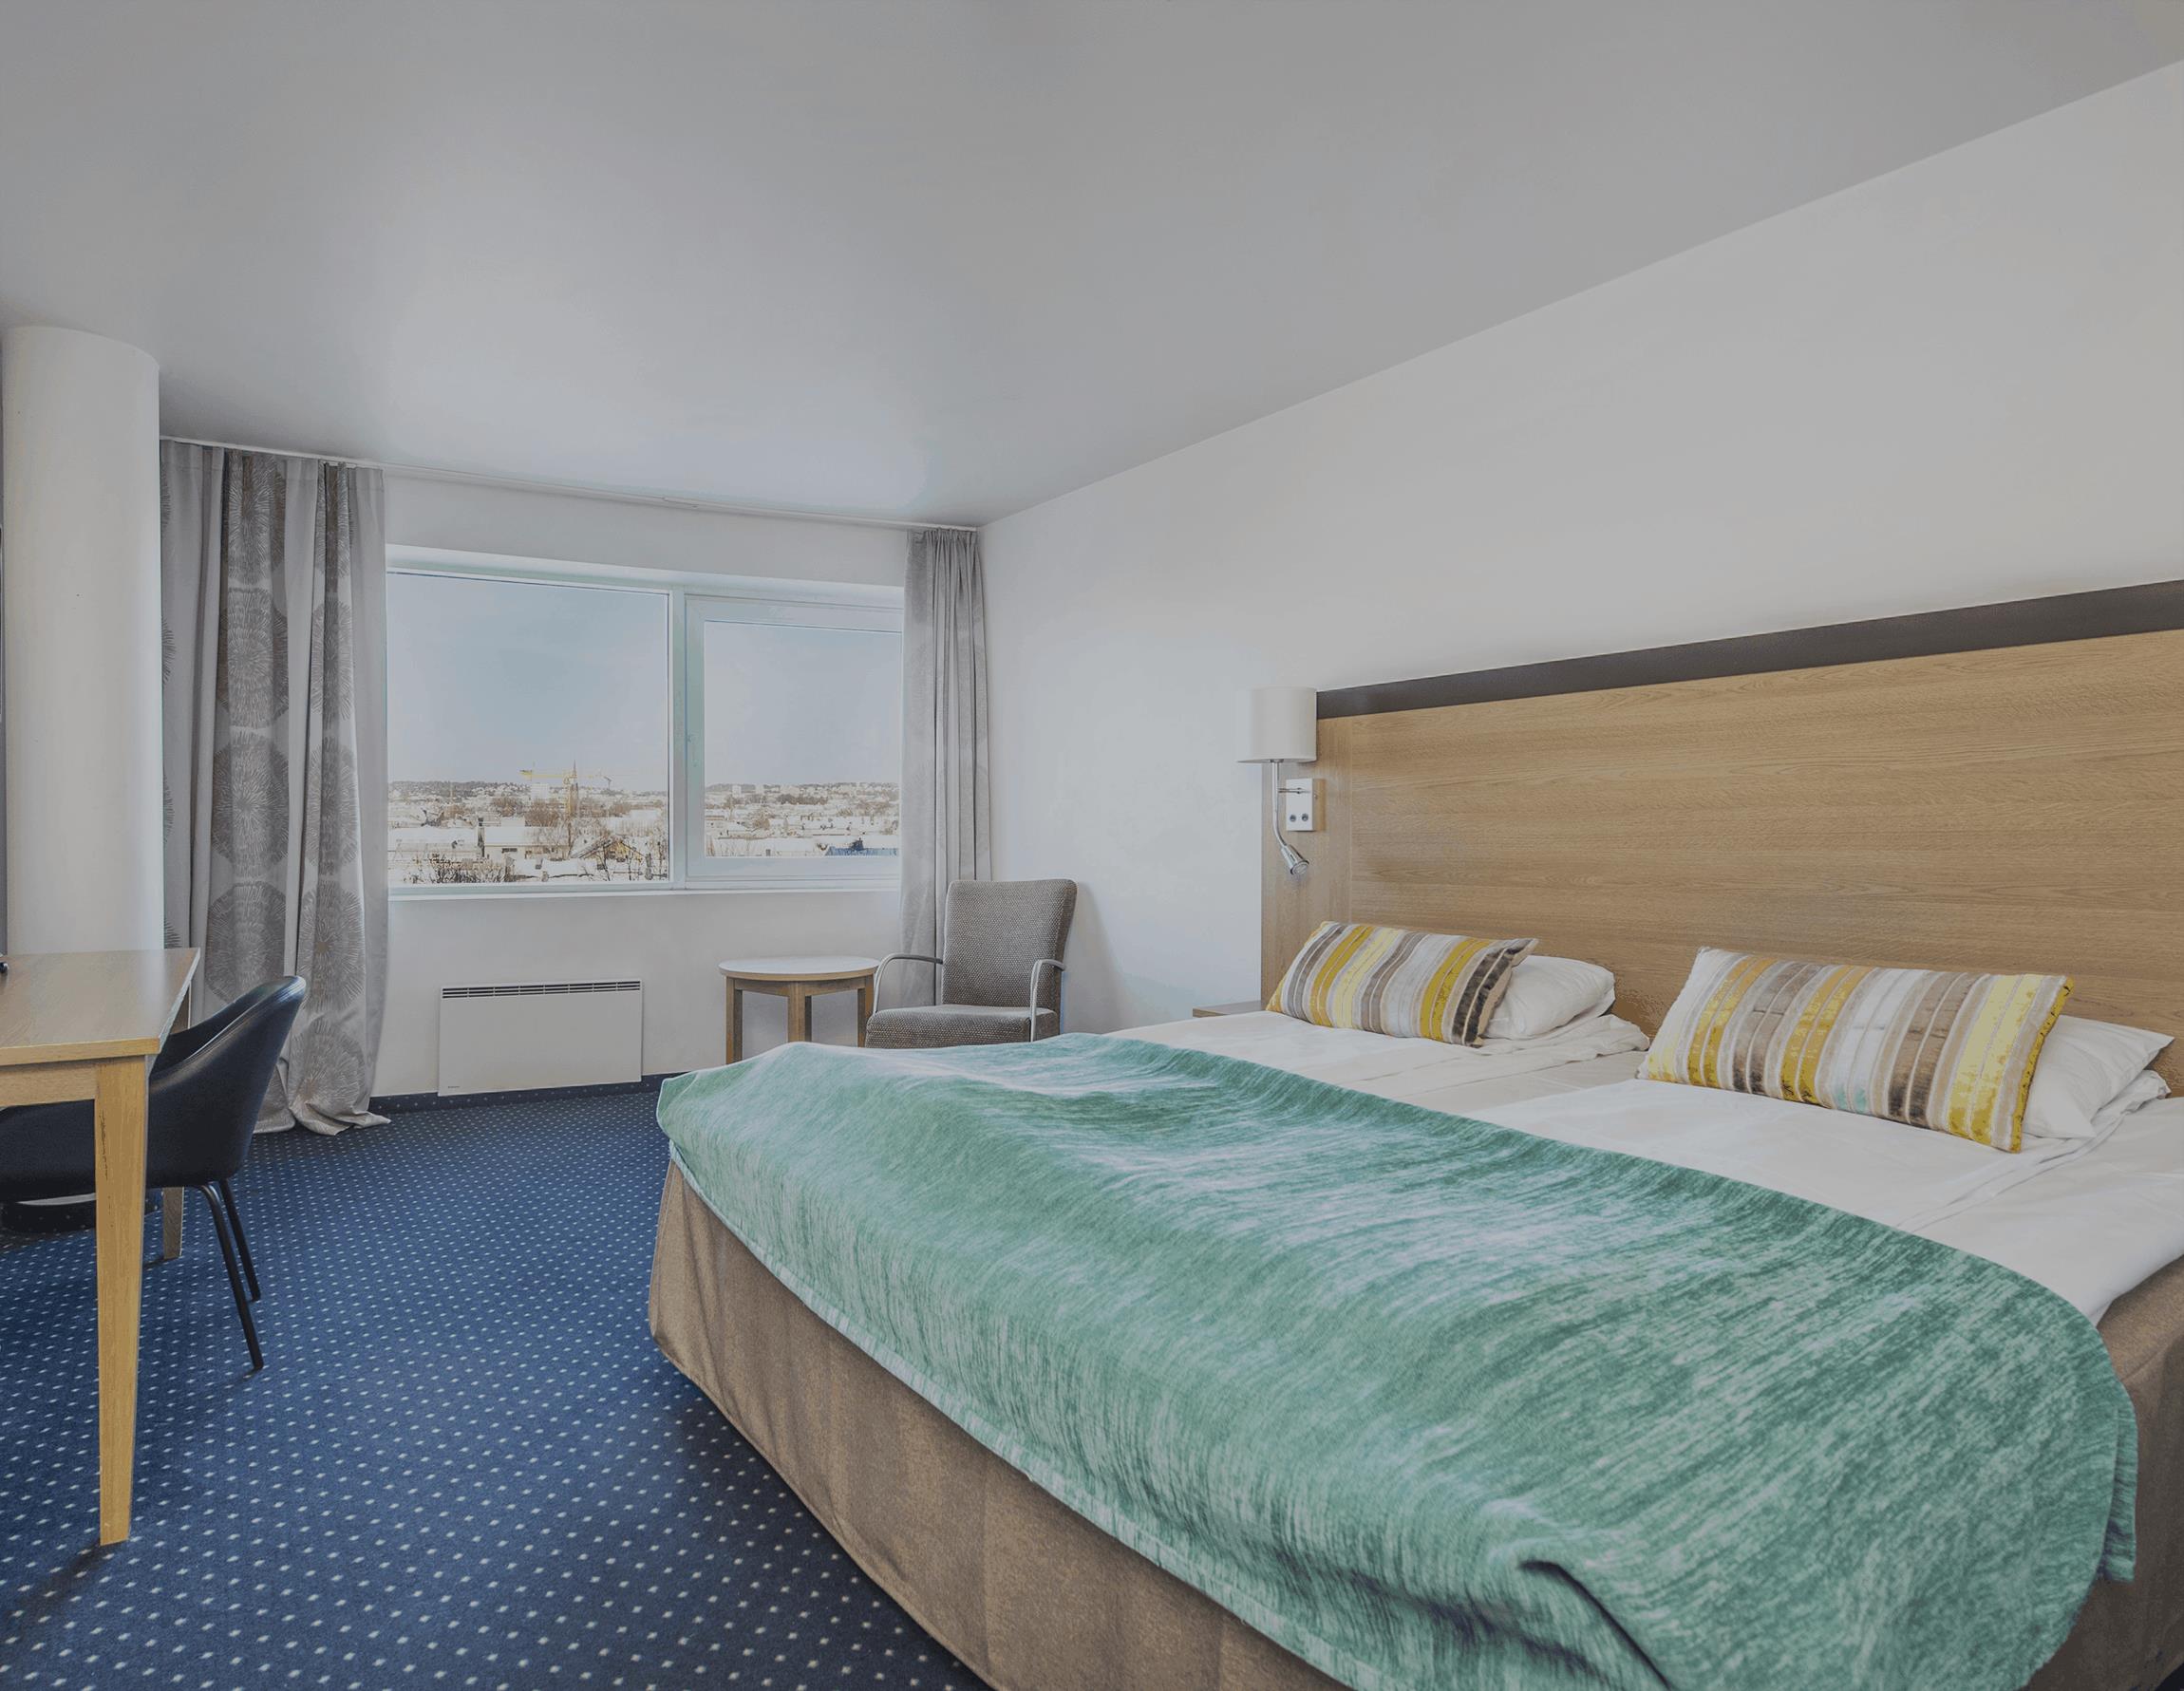 Anker Hotel-Oslo Updated 2022 Room Price-Reviews & Deals | Trip.com